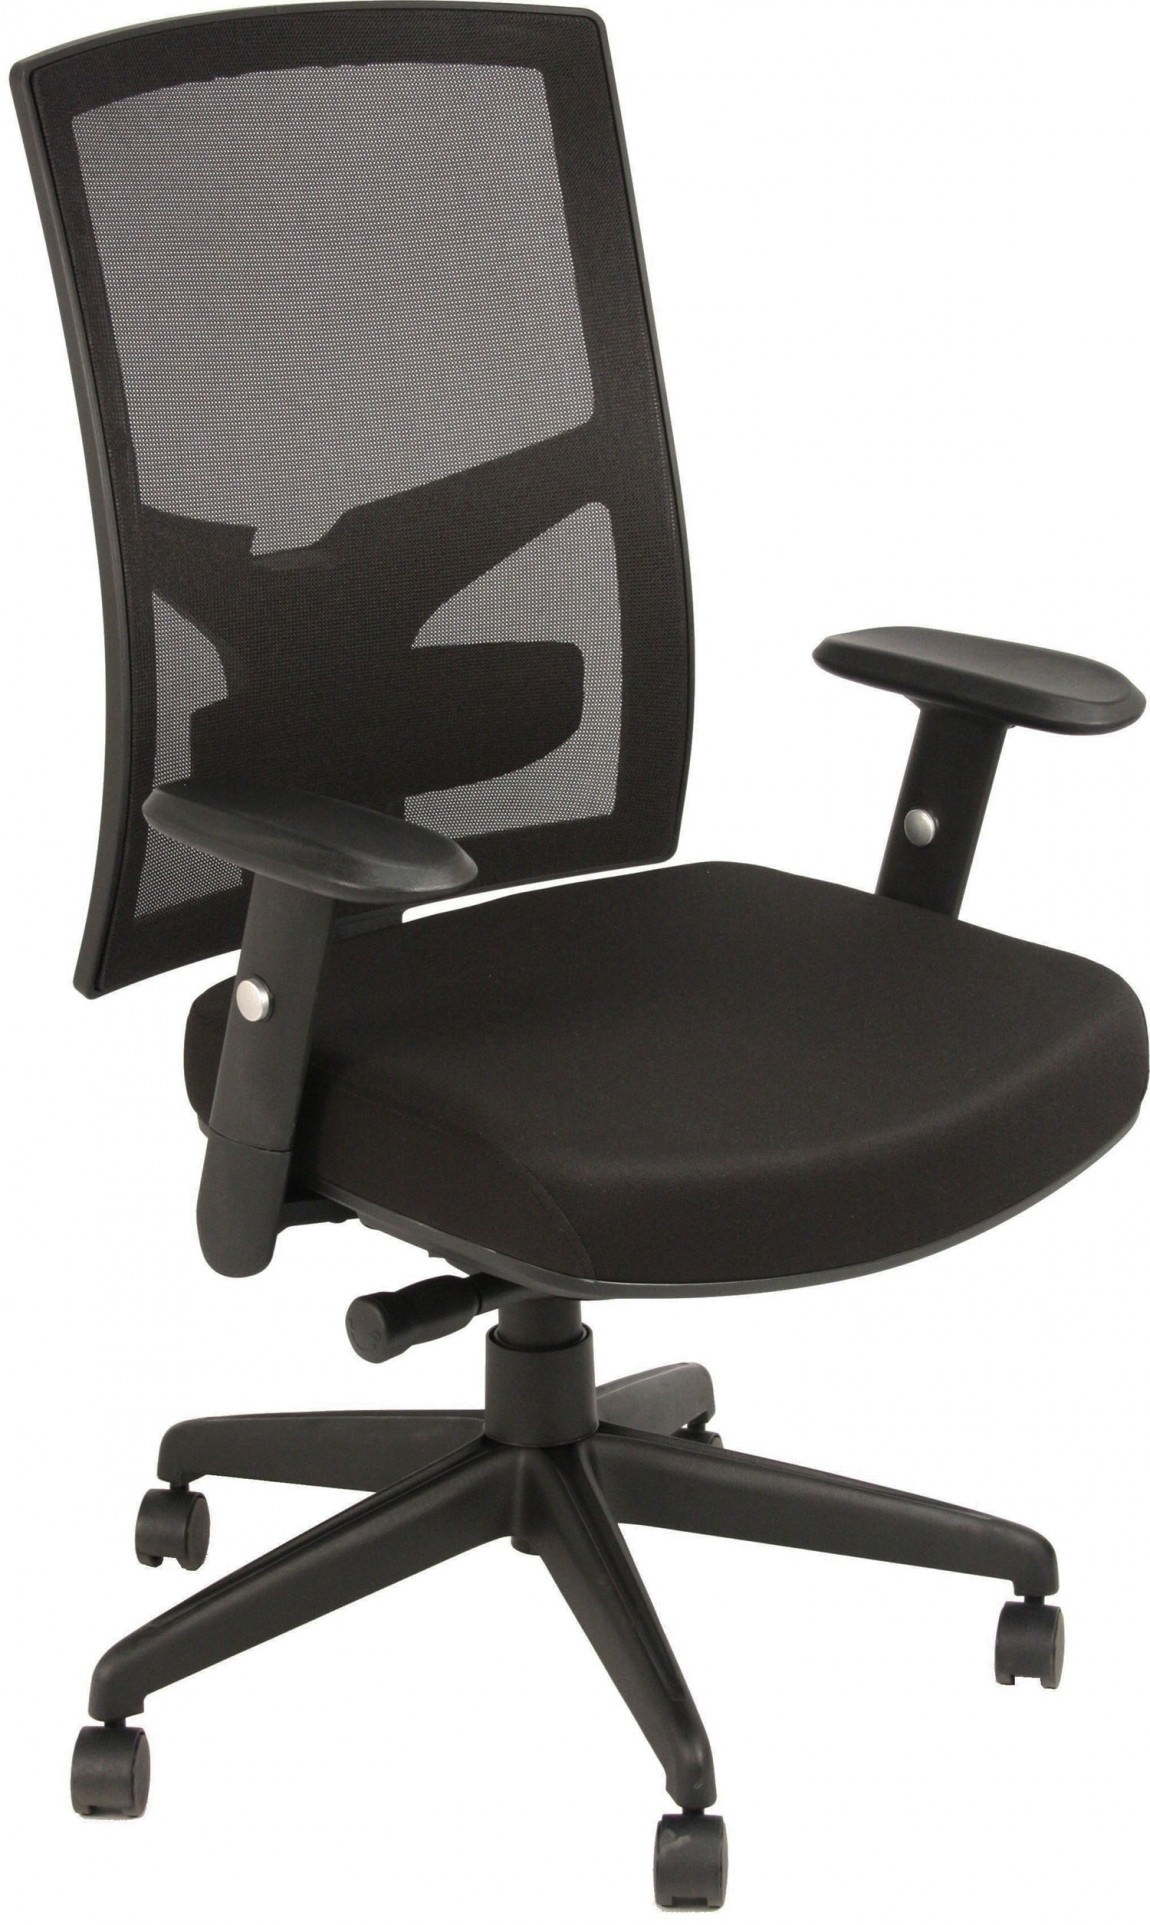 Black Mesh Back Office Chair : Ares : Express Office Furniture